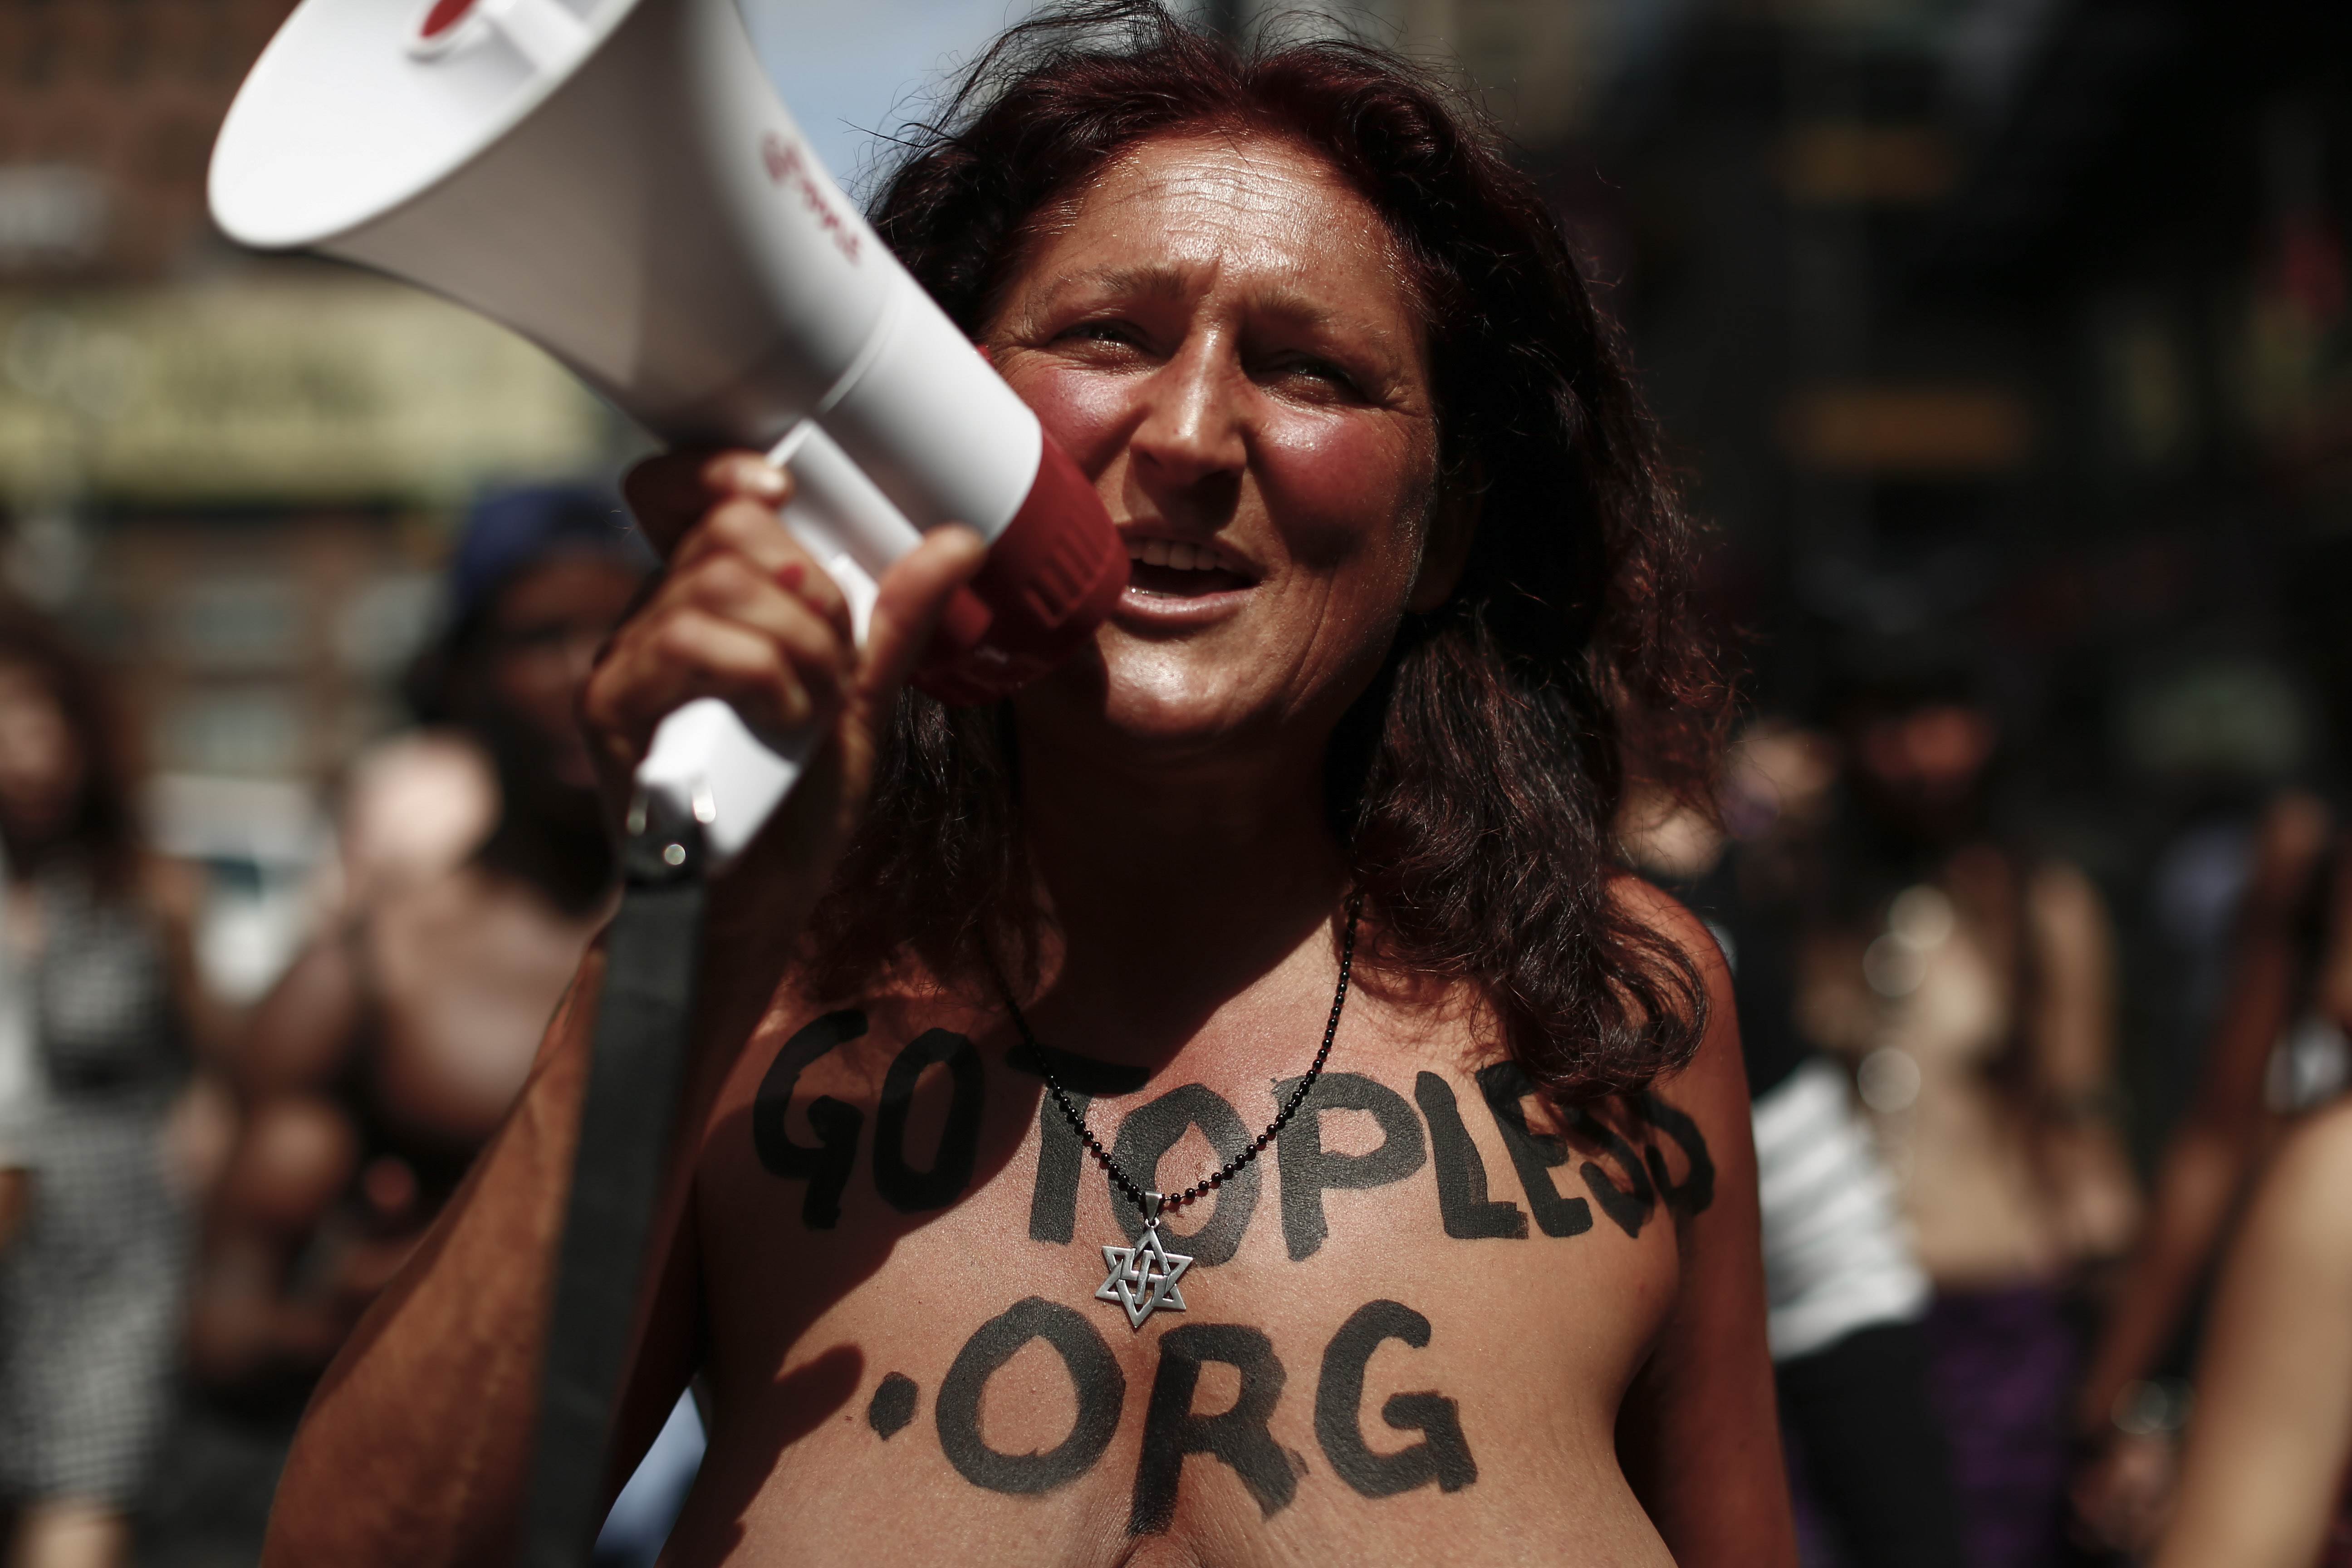 Boobs are natural': Topless rights protesters counter critics in